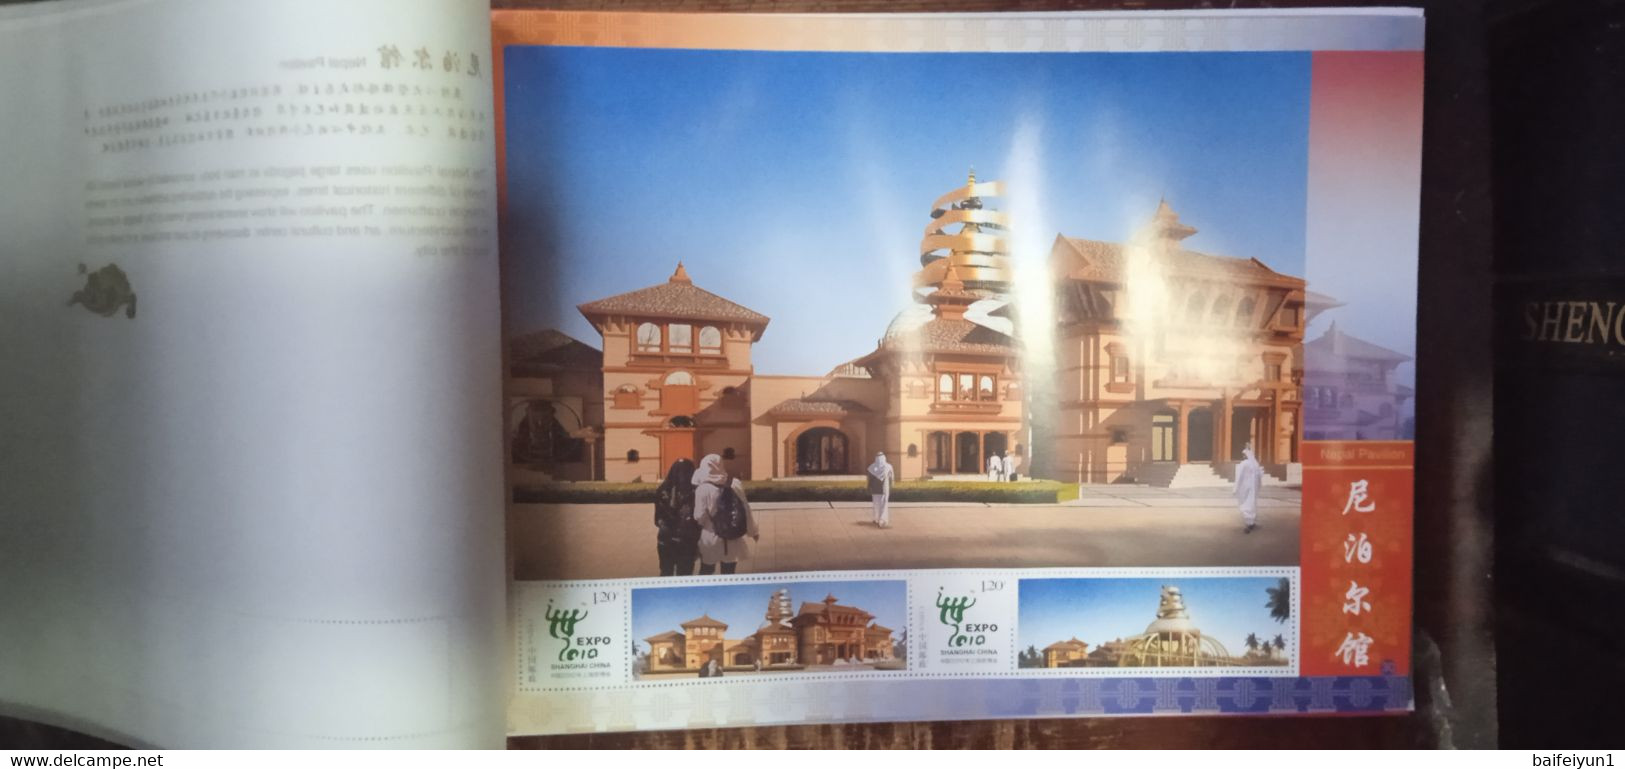 China 2010  The Pavilion of The World Exposition Shanghai China 2010 Special booklet